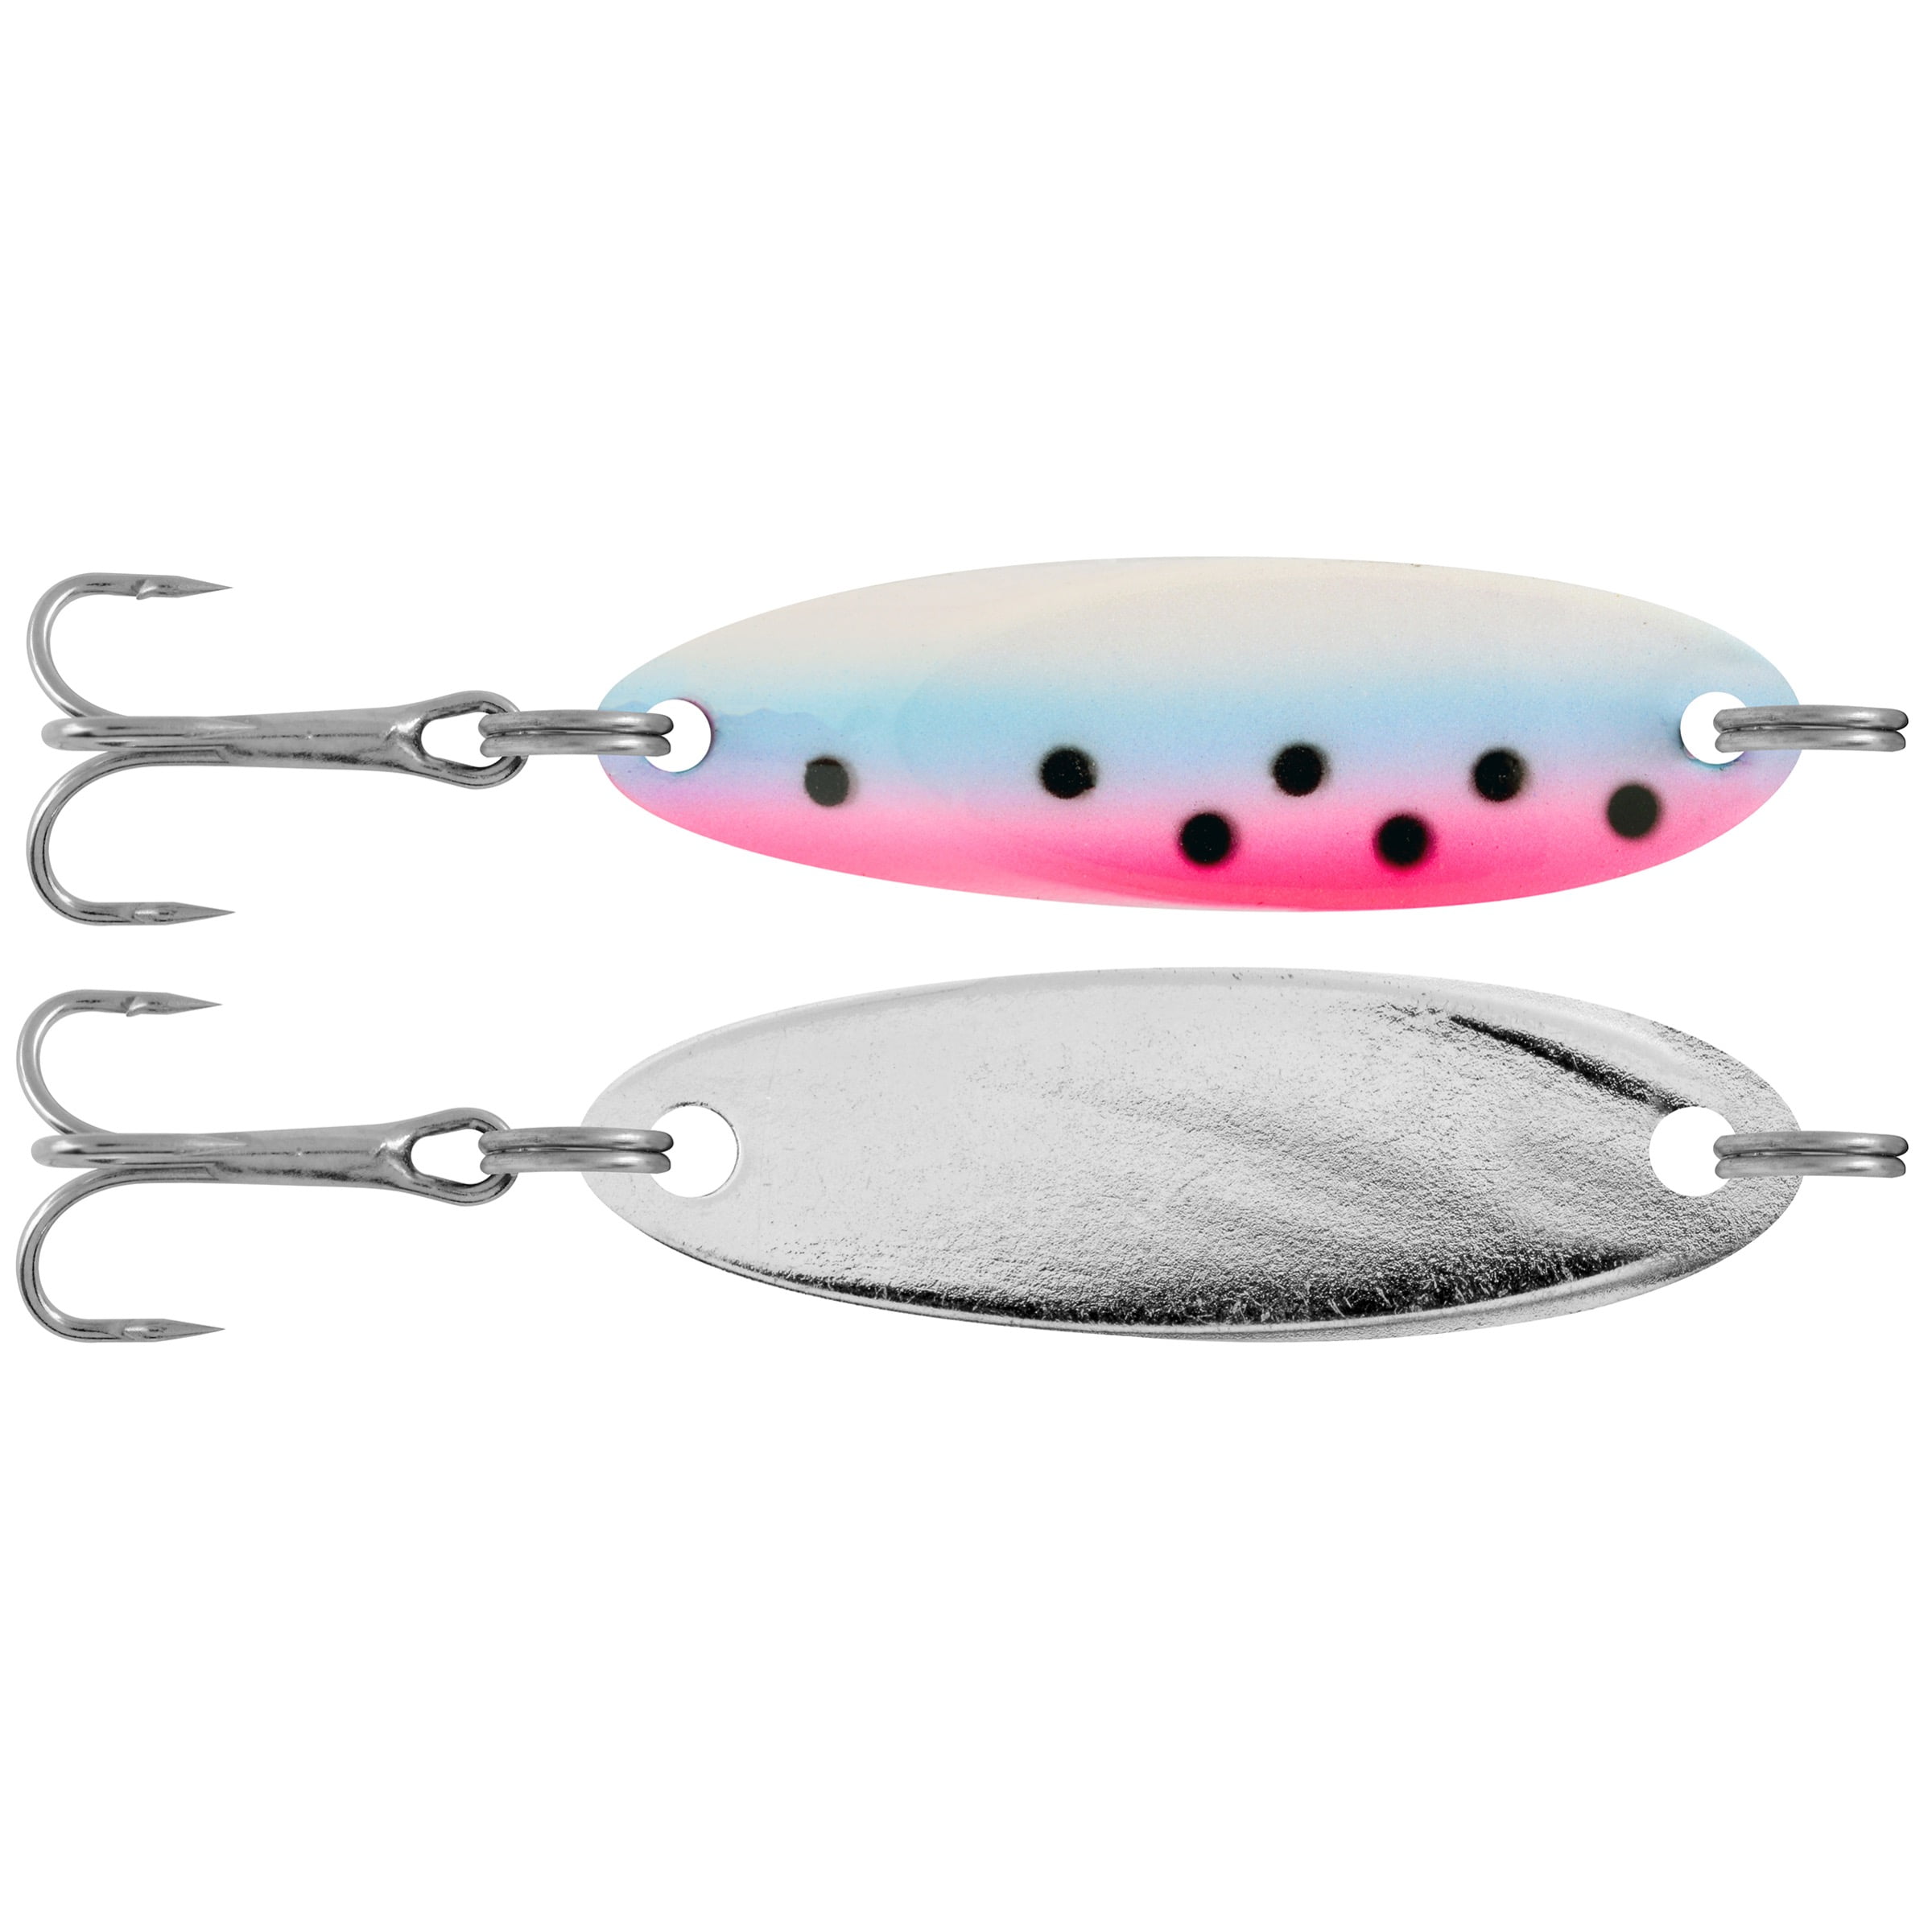 South Bend Kast-A-Way 1/8 oz. Rainbow Trout, Fishing Spoons 